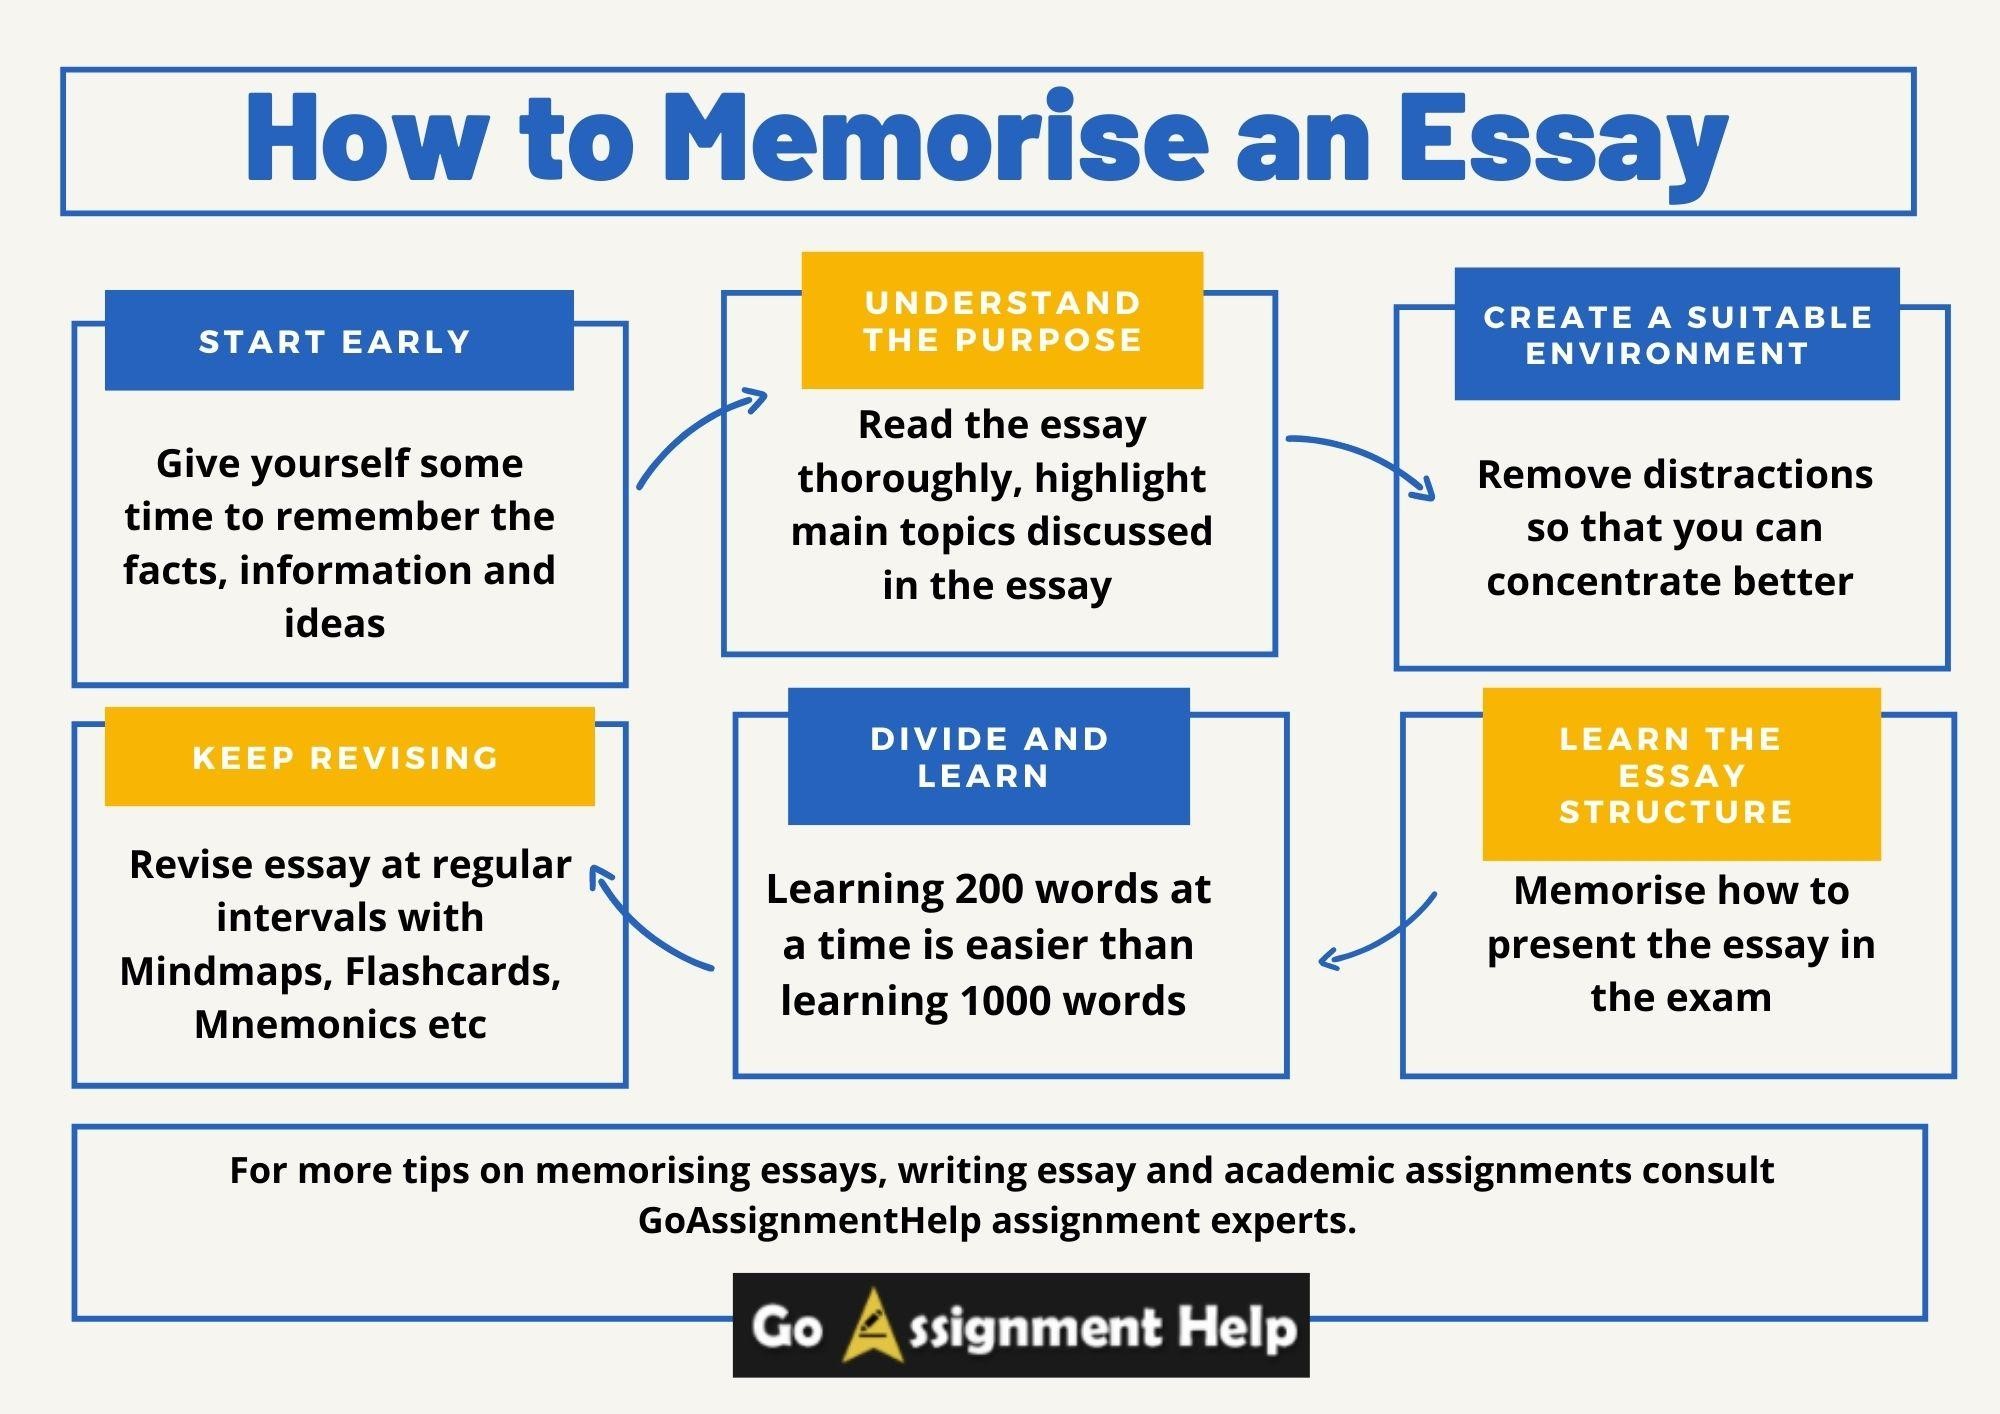 how to memorize an essay in a day